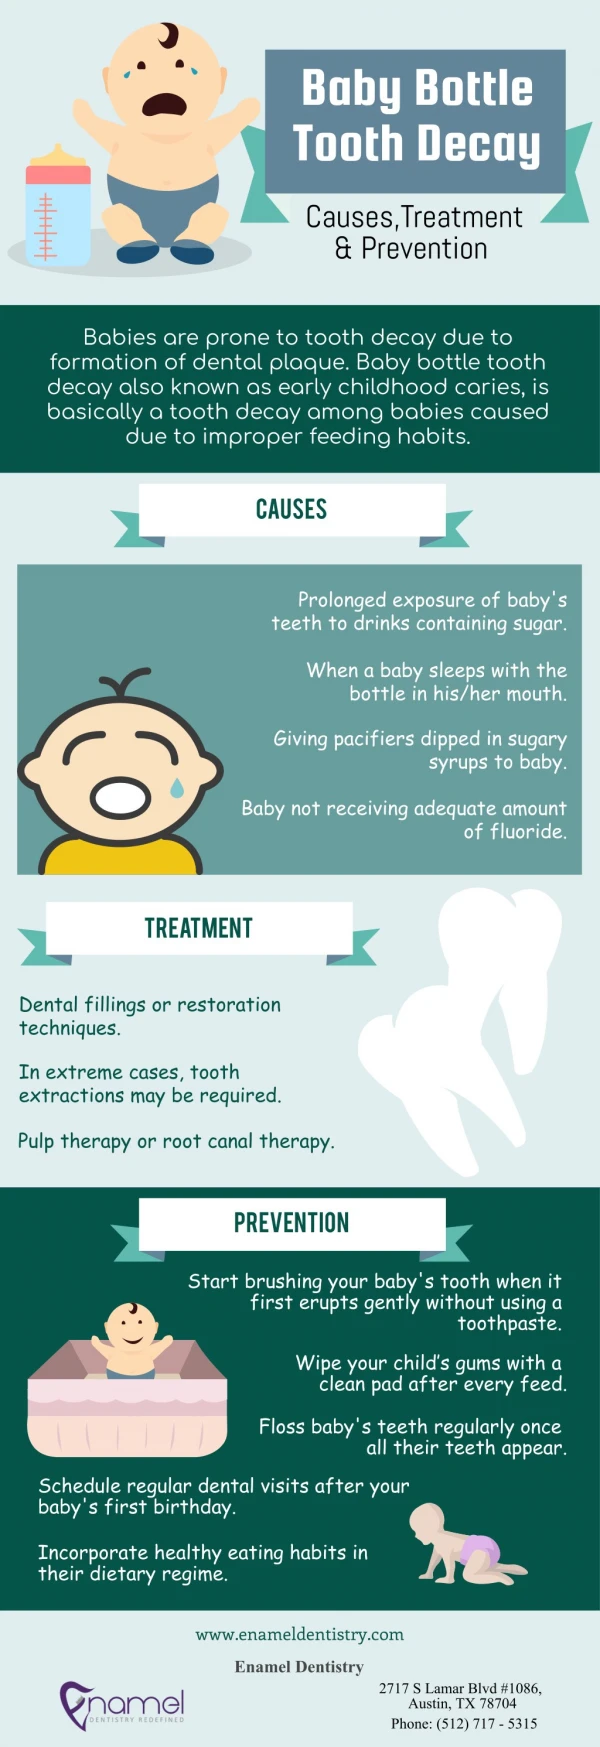 Baby Bottle Tooth Decay Causes, Treatment & Prevention